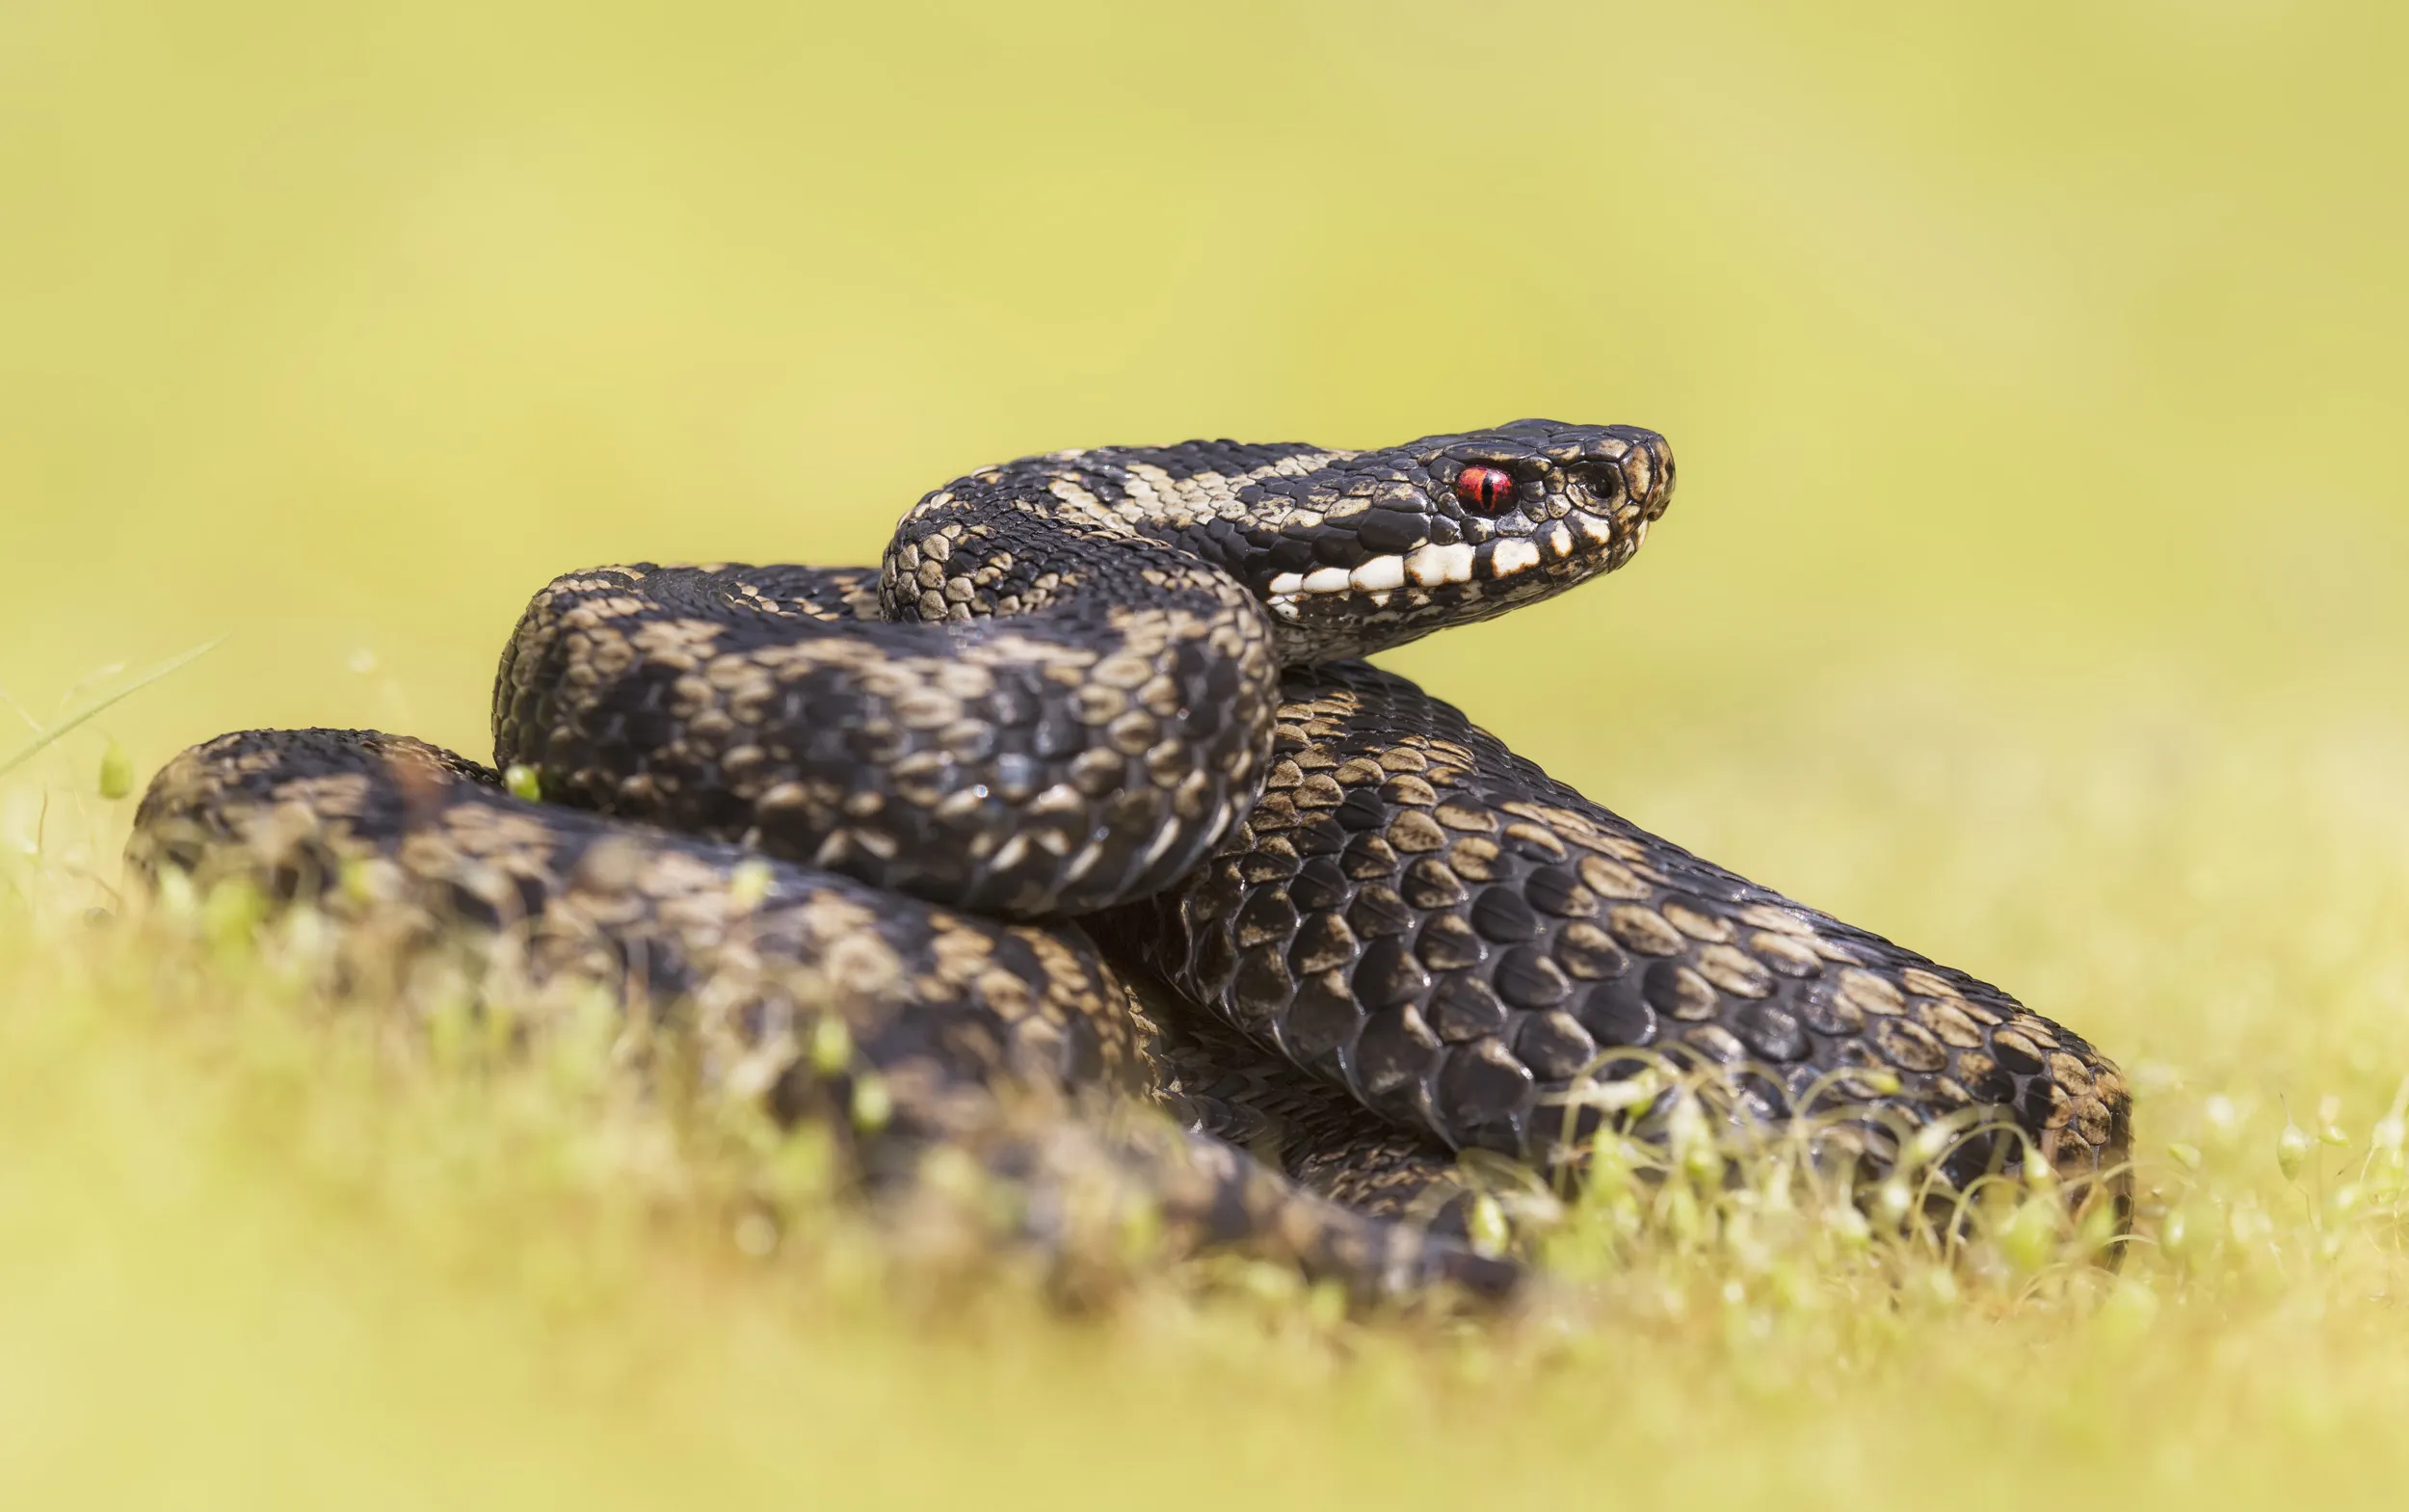 An Adder coiled up in amongst dried out grass.